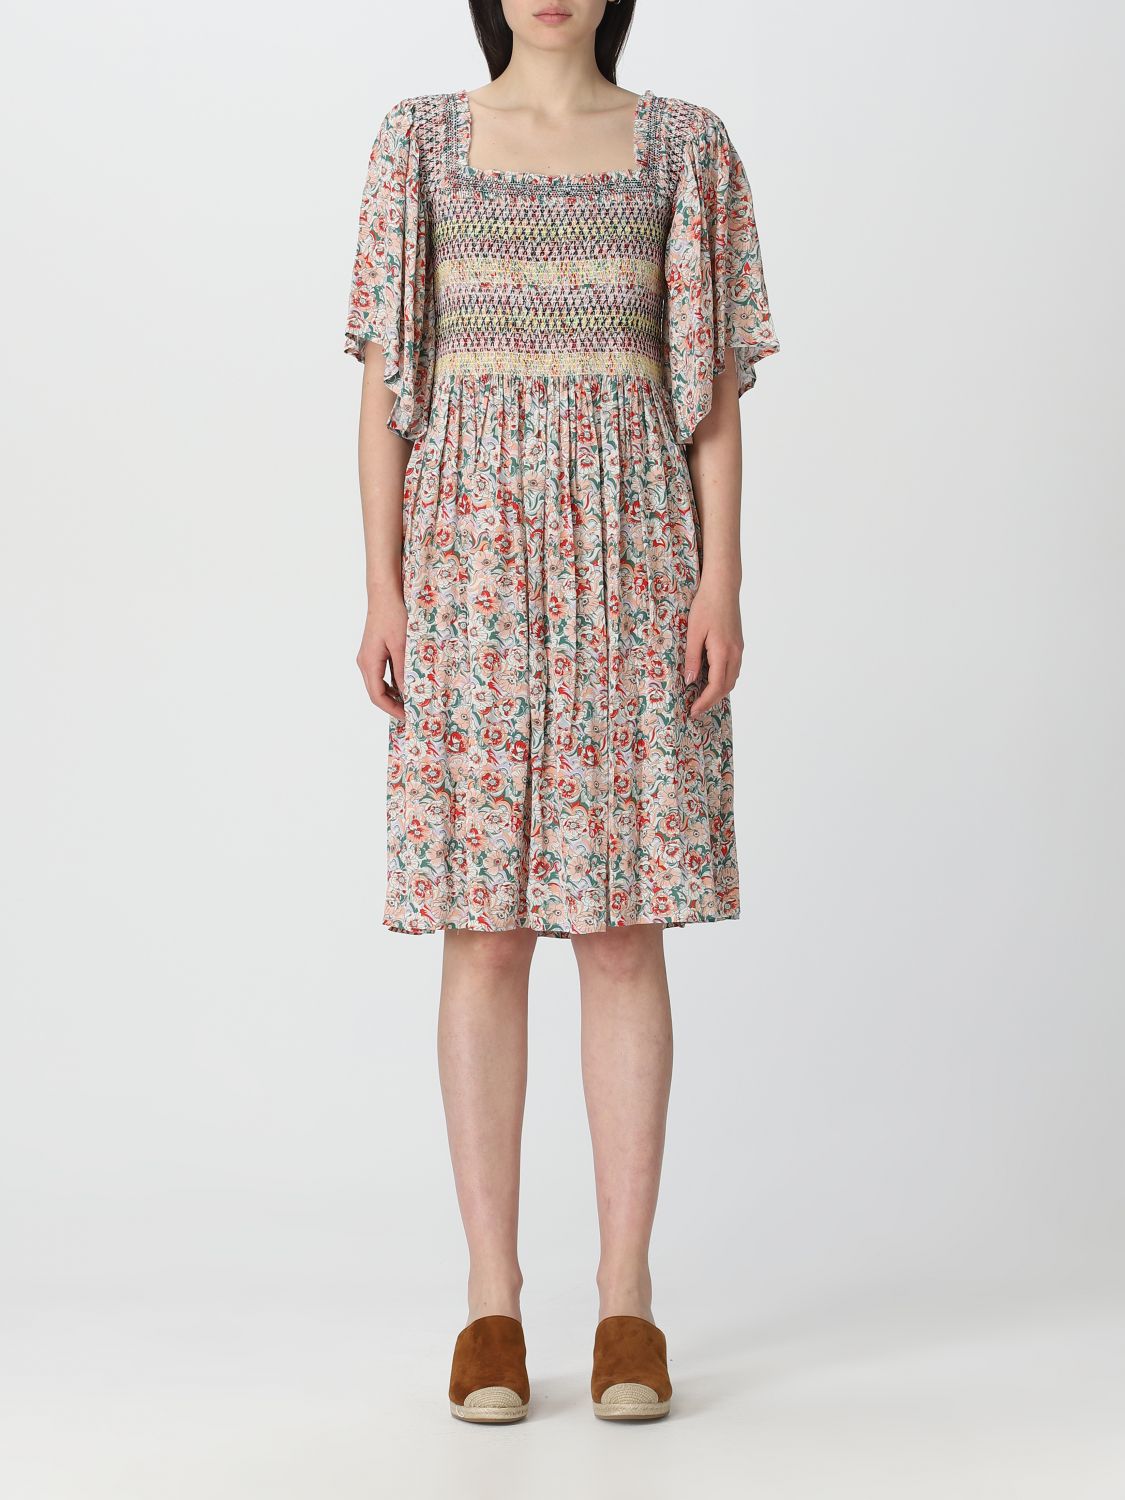 See By Chloé Floral Motif Square Neck Dress In Beige